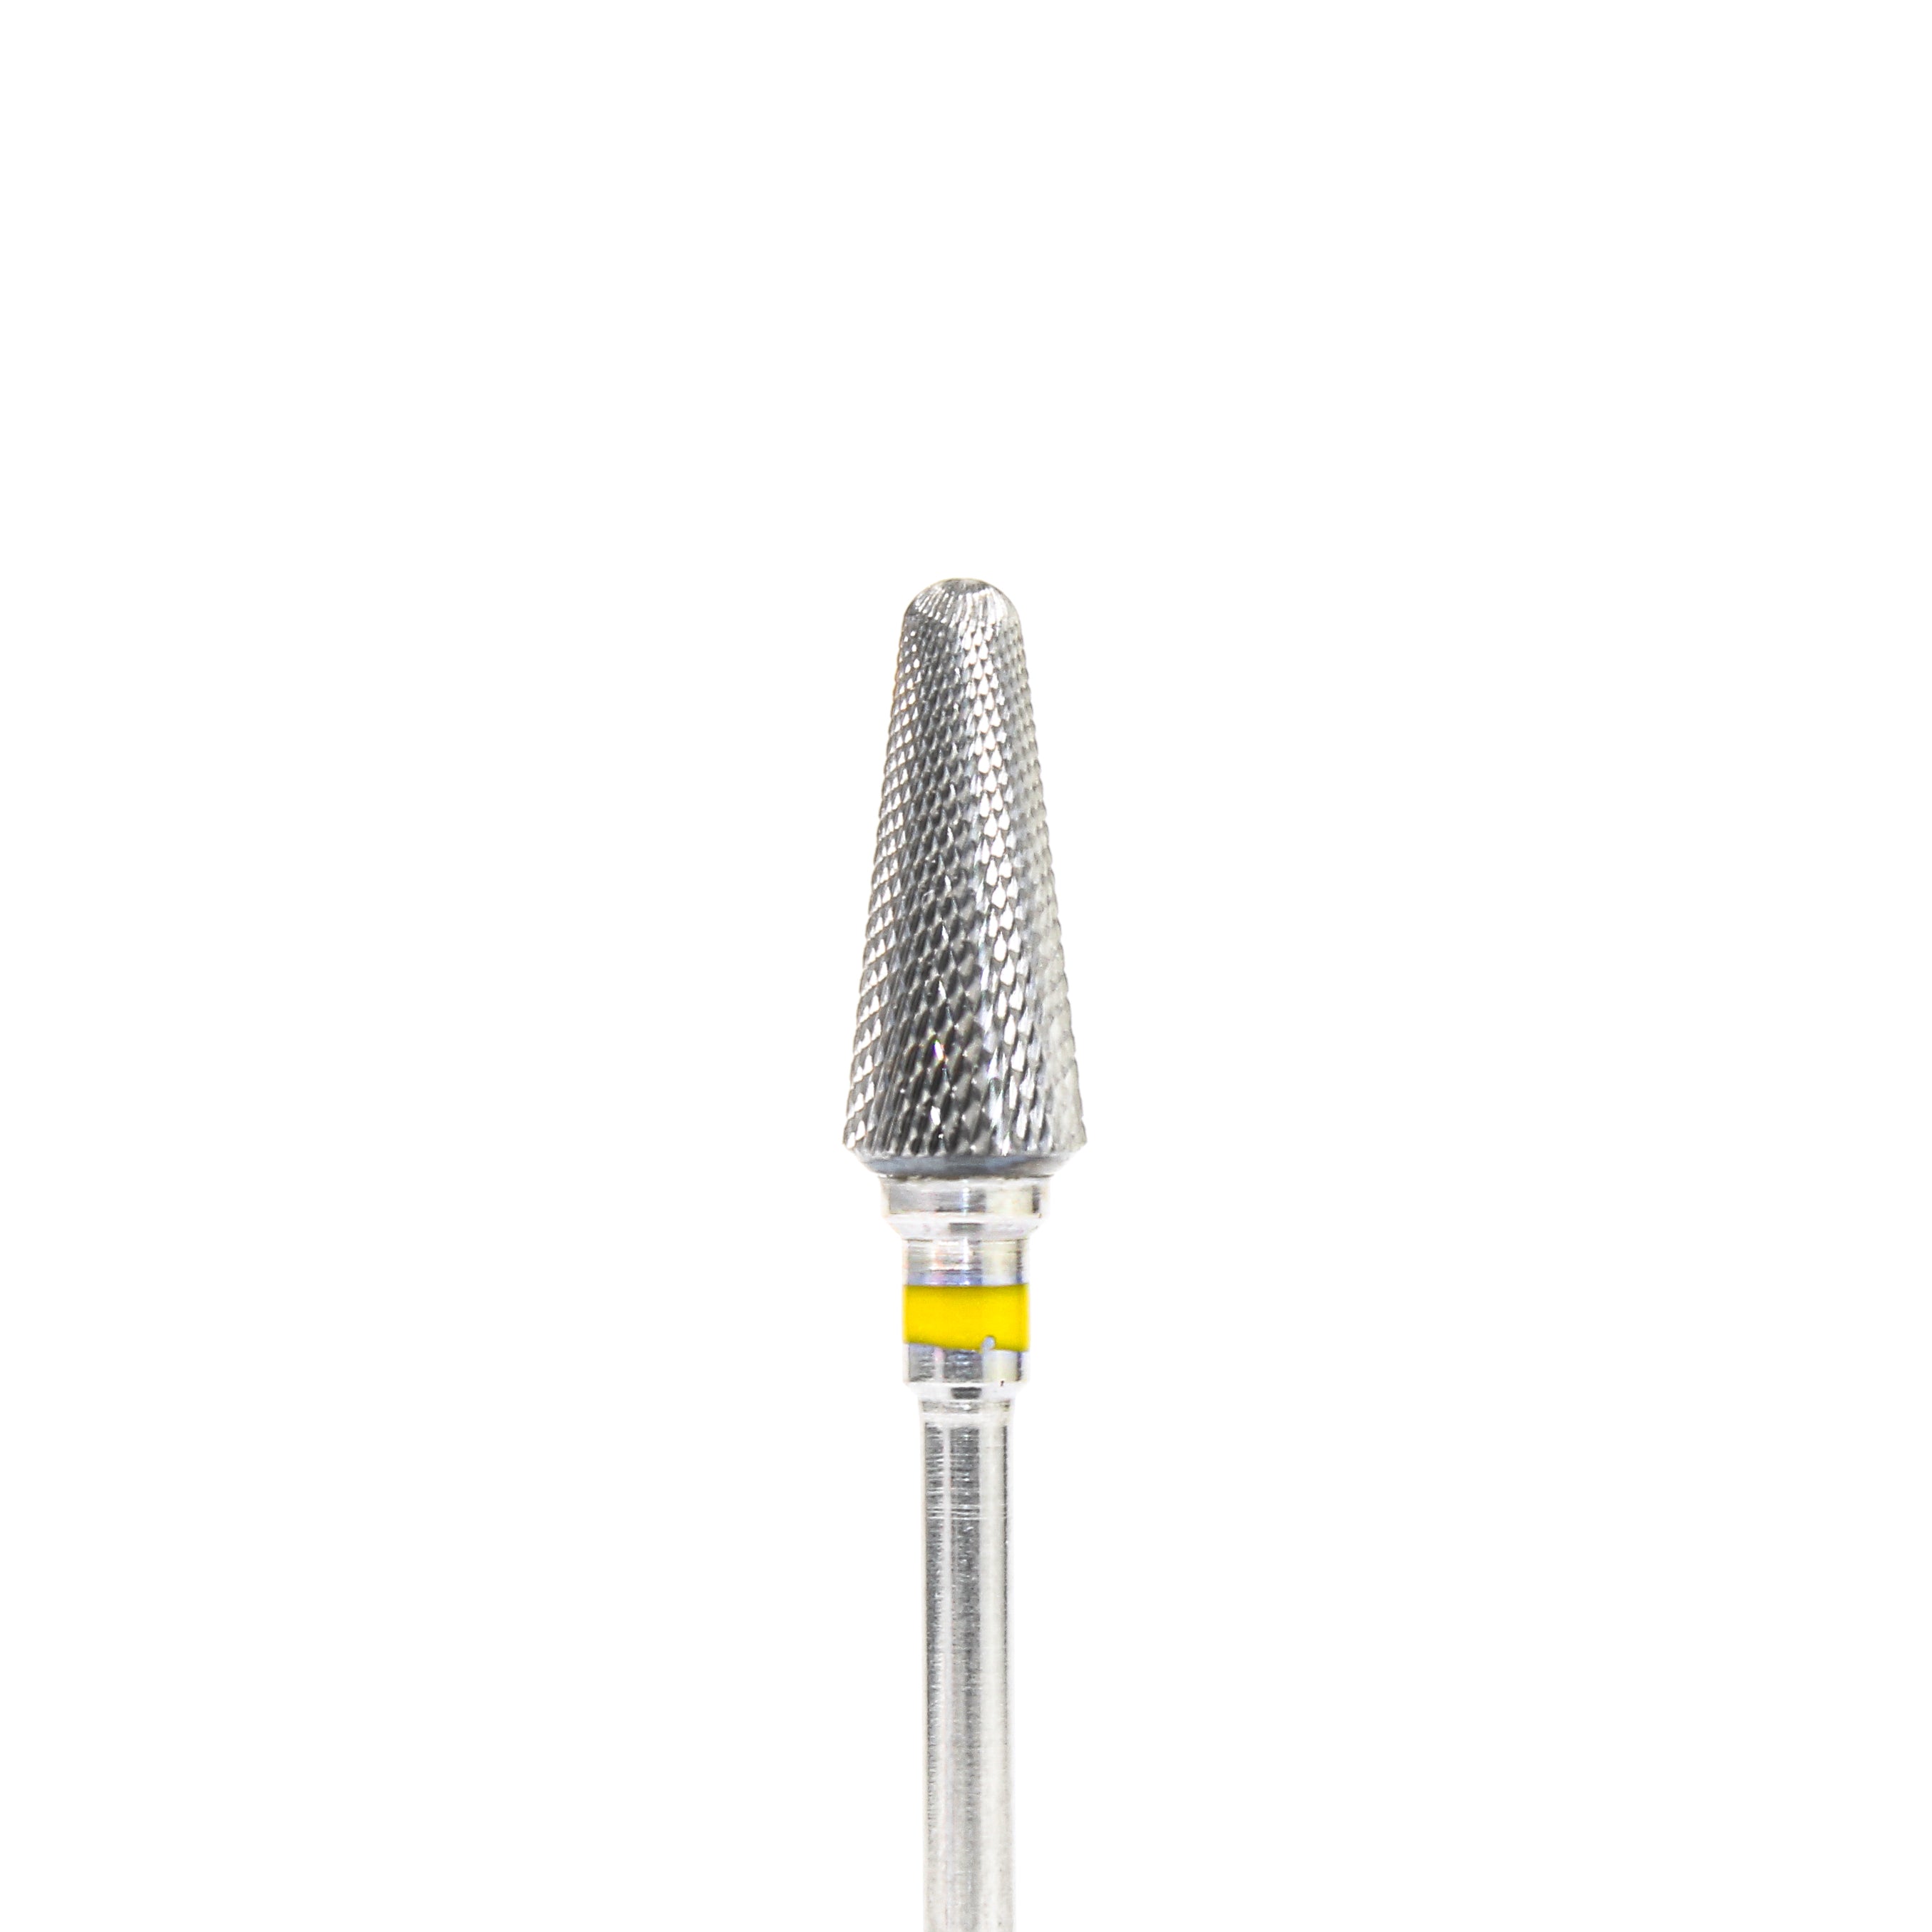 Yellow Disassembly Tip